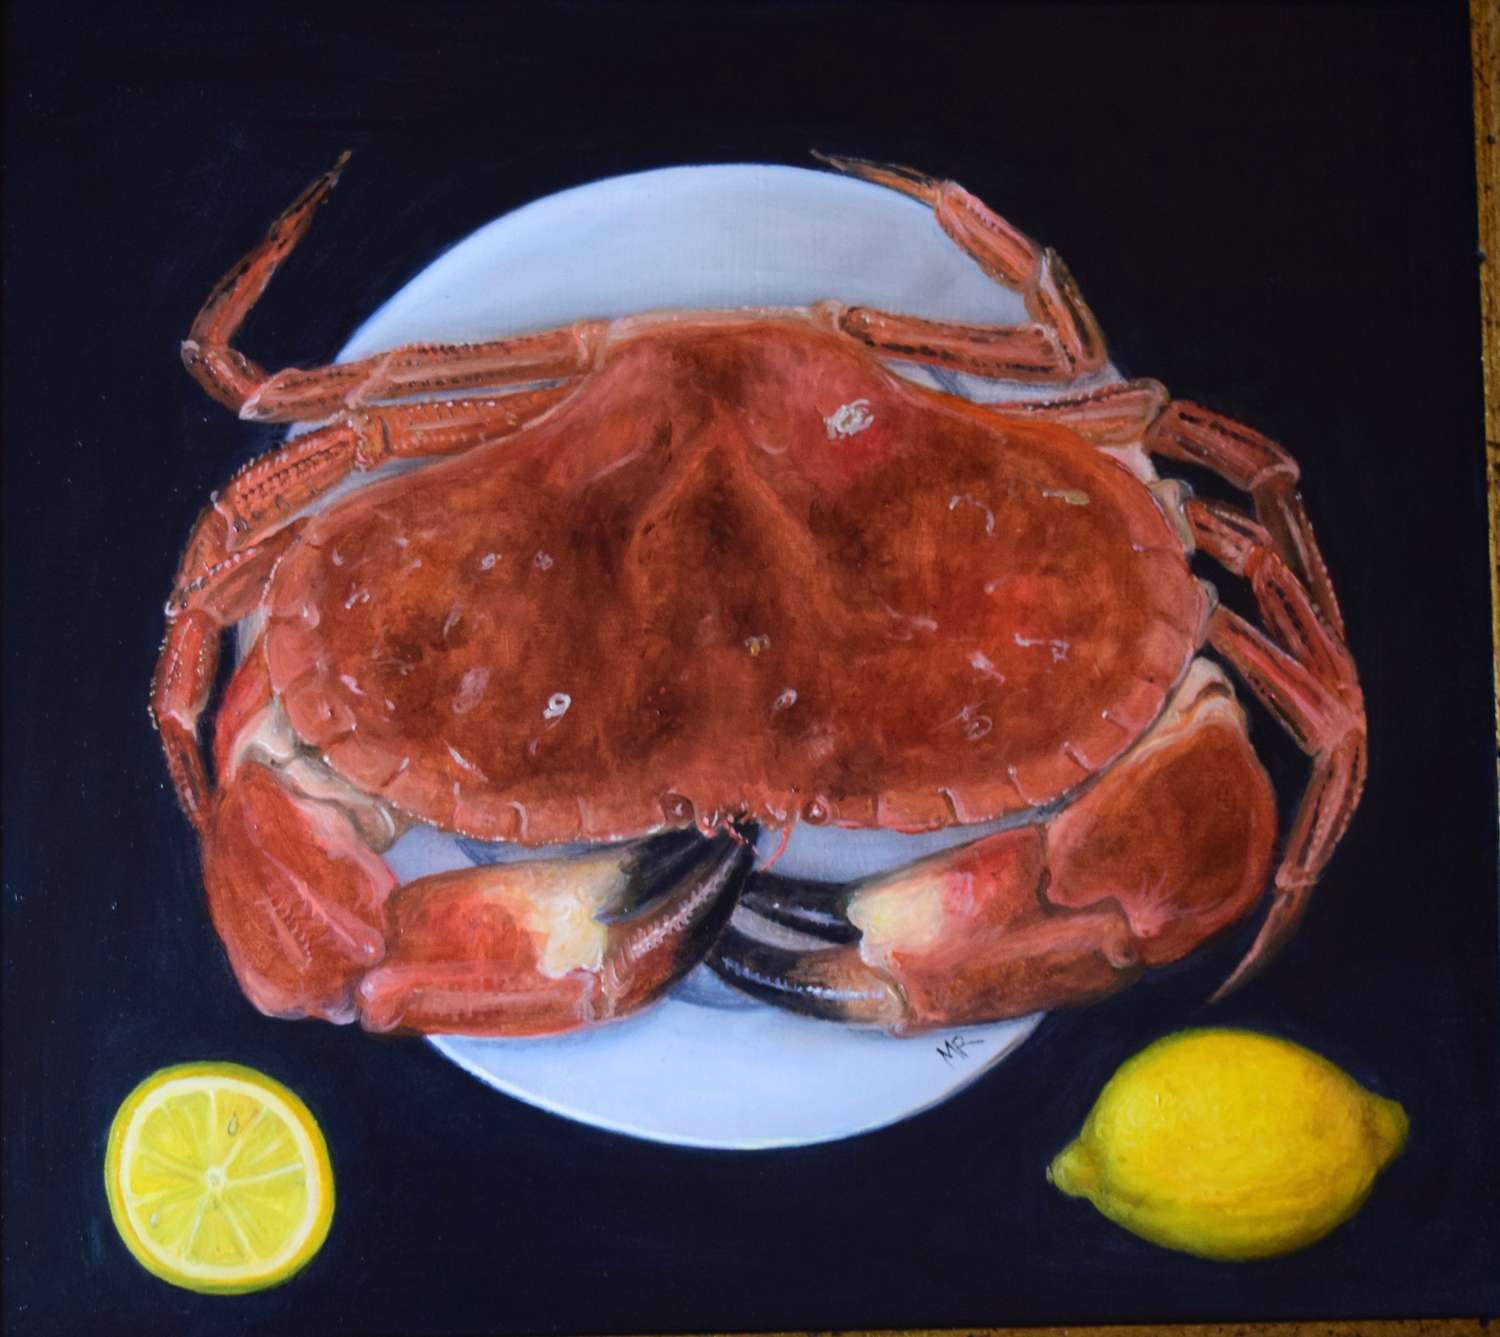 Crab on a plate